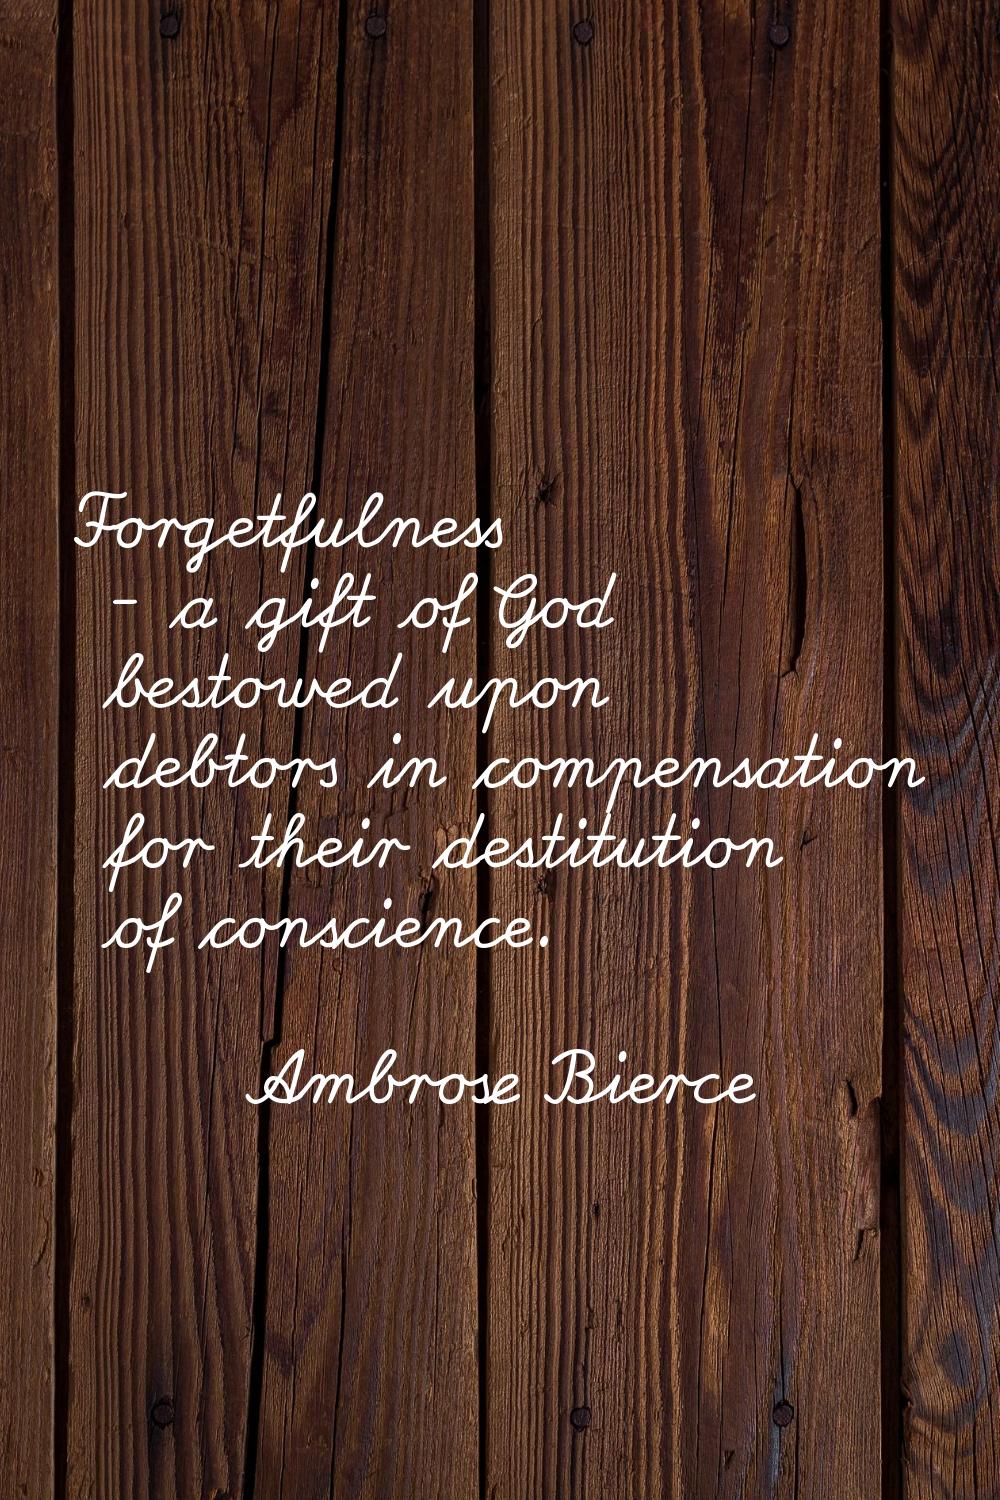 Forgetfulness - a gift of God bestowed upon debtors in compensation for their destitution of consci